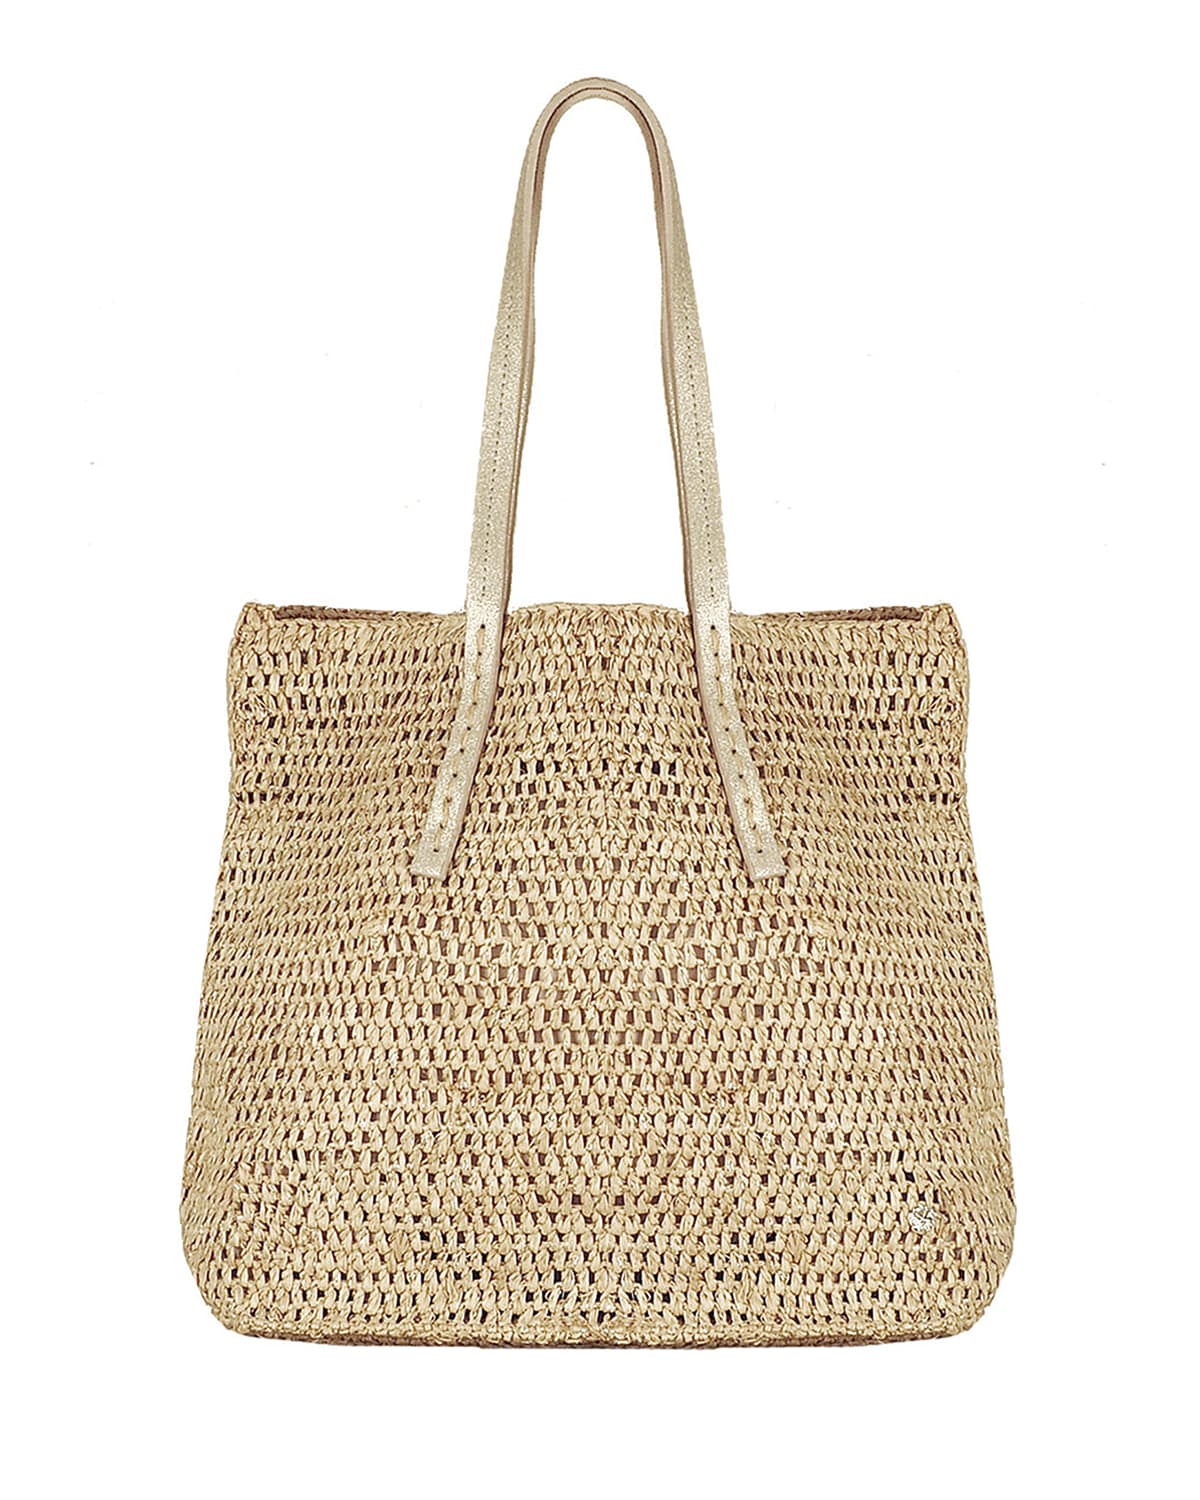 Tybee Beach Tote Bag In Almond/silver